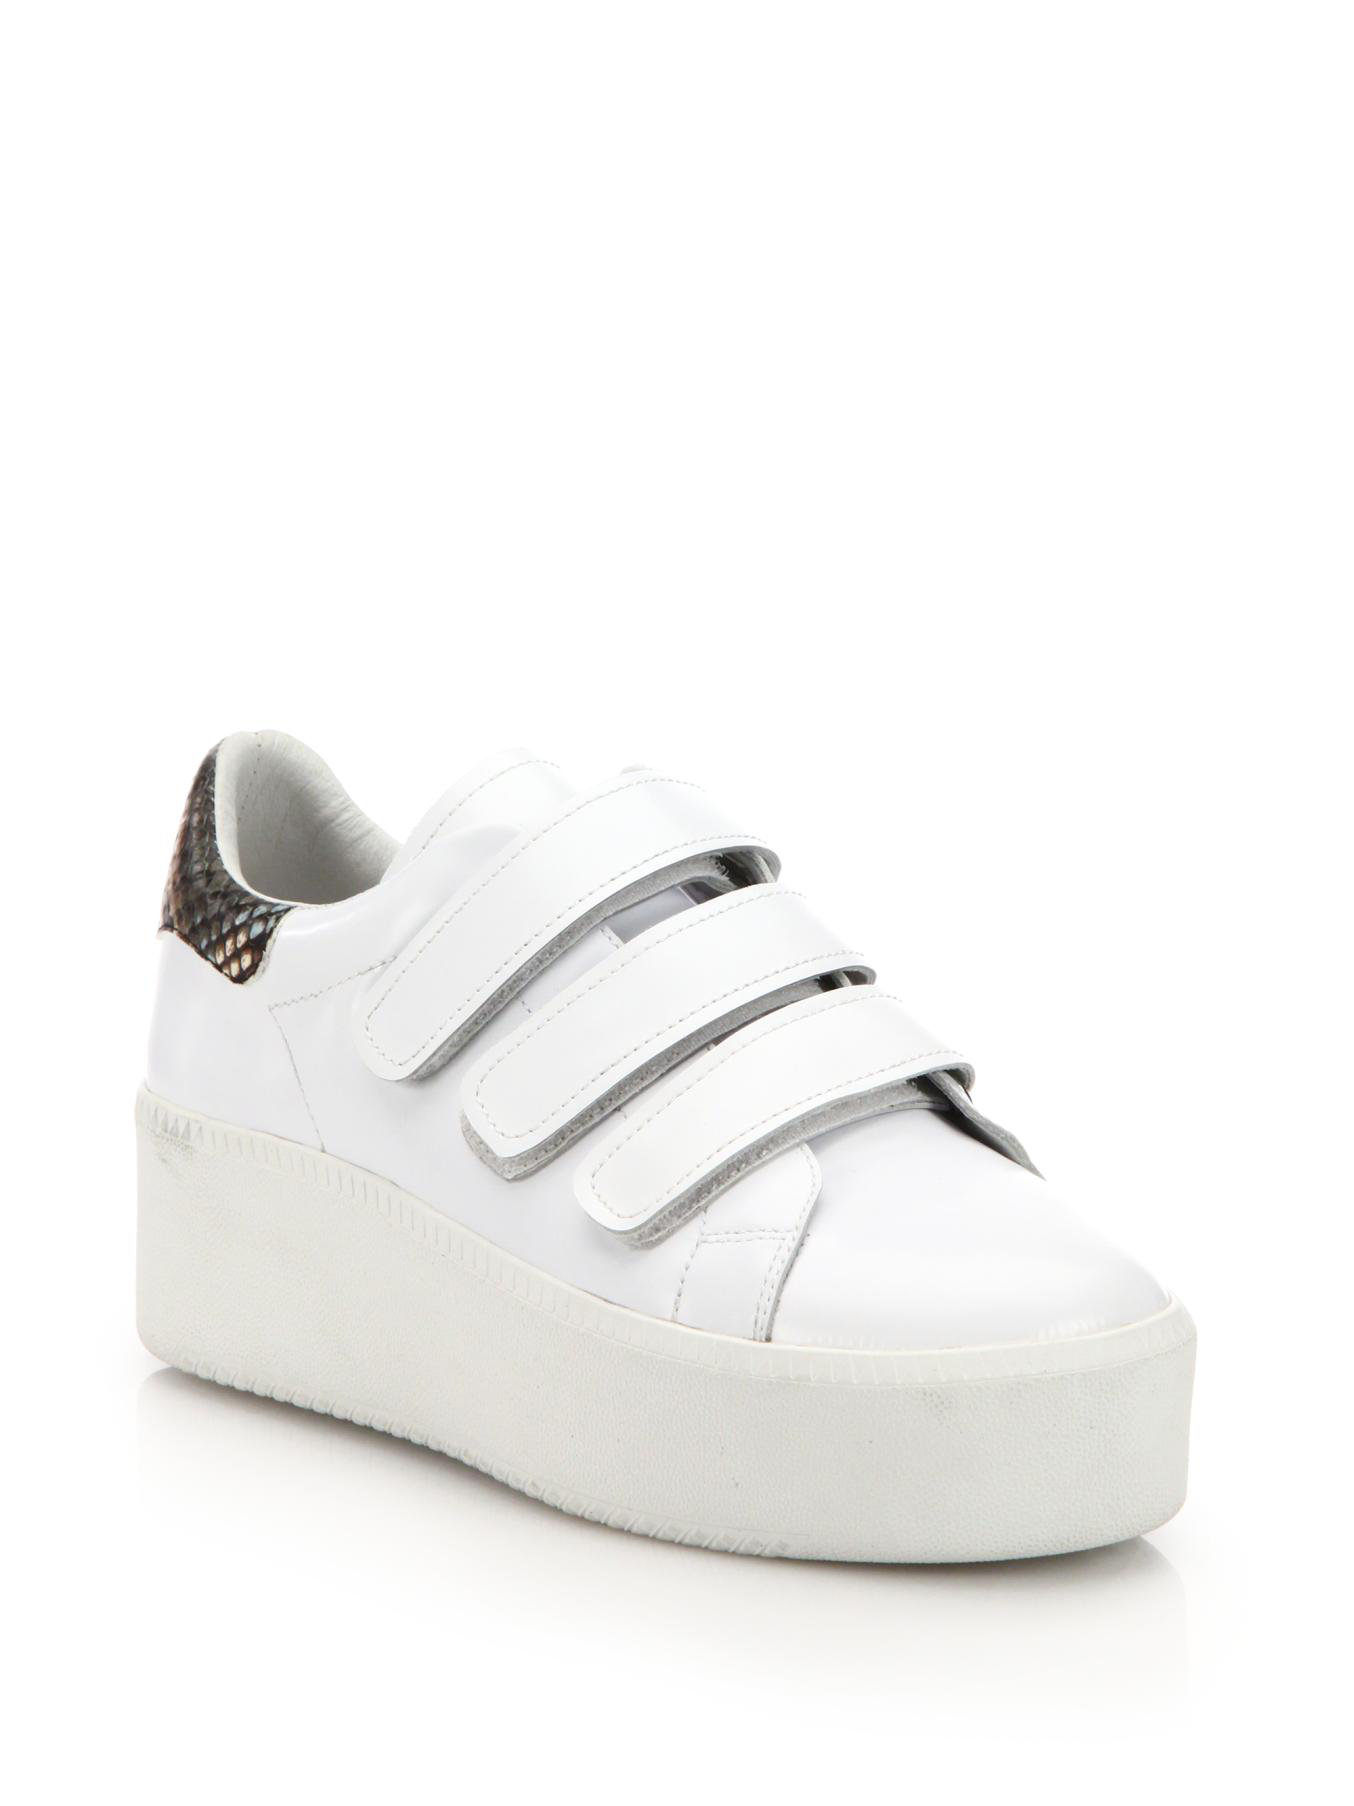 Ash Cool Leather Platform Sneakers in White | Lyst